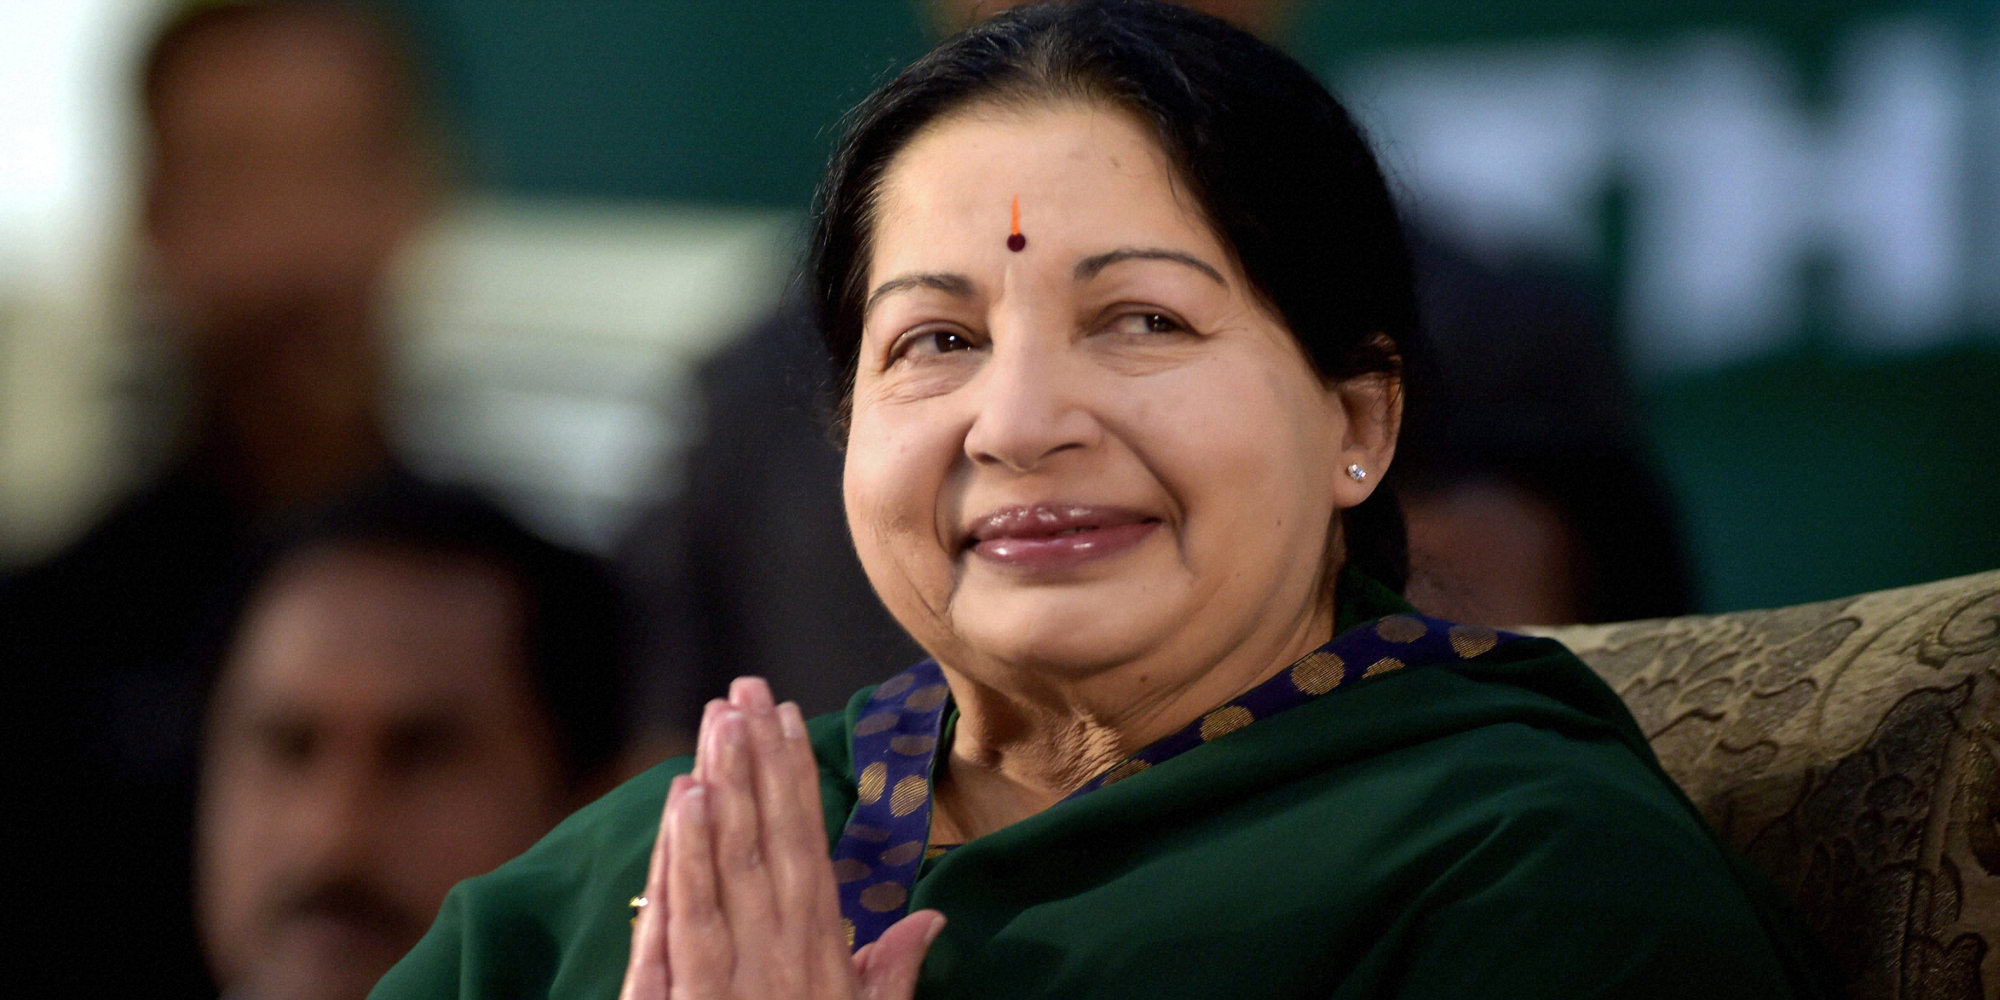 AIADMK leader Jayaram Jayalalitha greets the audience during her swearing-in-ceremony as the Chief Minister of Tamil Nadu state in Chennai, India, Saturday, May 23, 2015. An appeals court acquitted the powerful politician in southern India of corruption charges earlier this month, clearing the way for her to return to public office. She was forced last year to step down as the highest elected official in Tamil Nadu after a Bangalore court in September convicted her of possessing wealth disproportionate to her income and sentenced her to four years in prison. (R. Senthil Kumar/ Press Trust of India via AP)